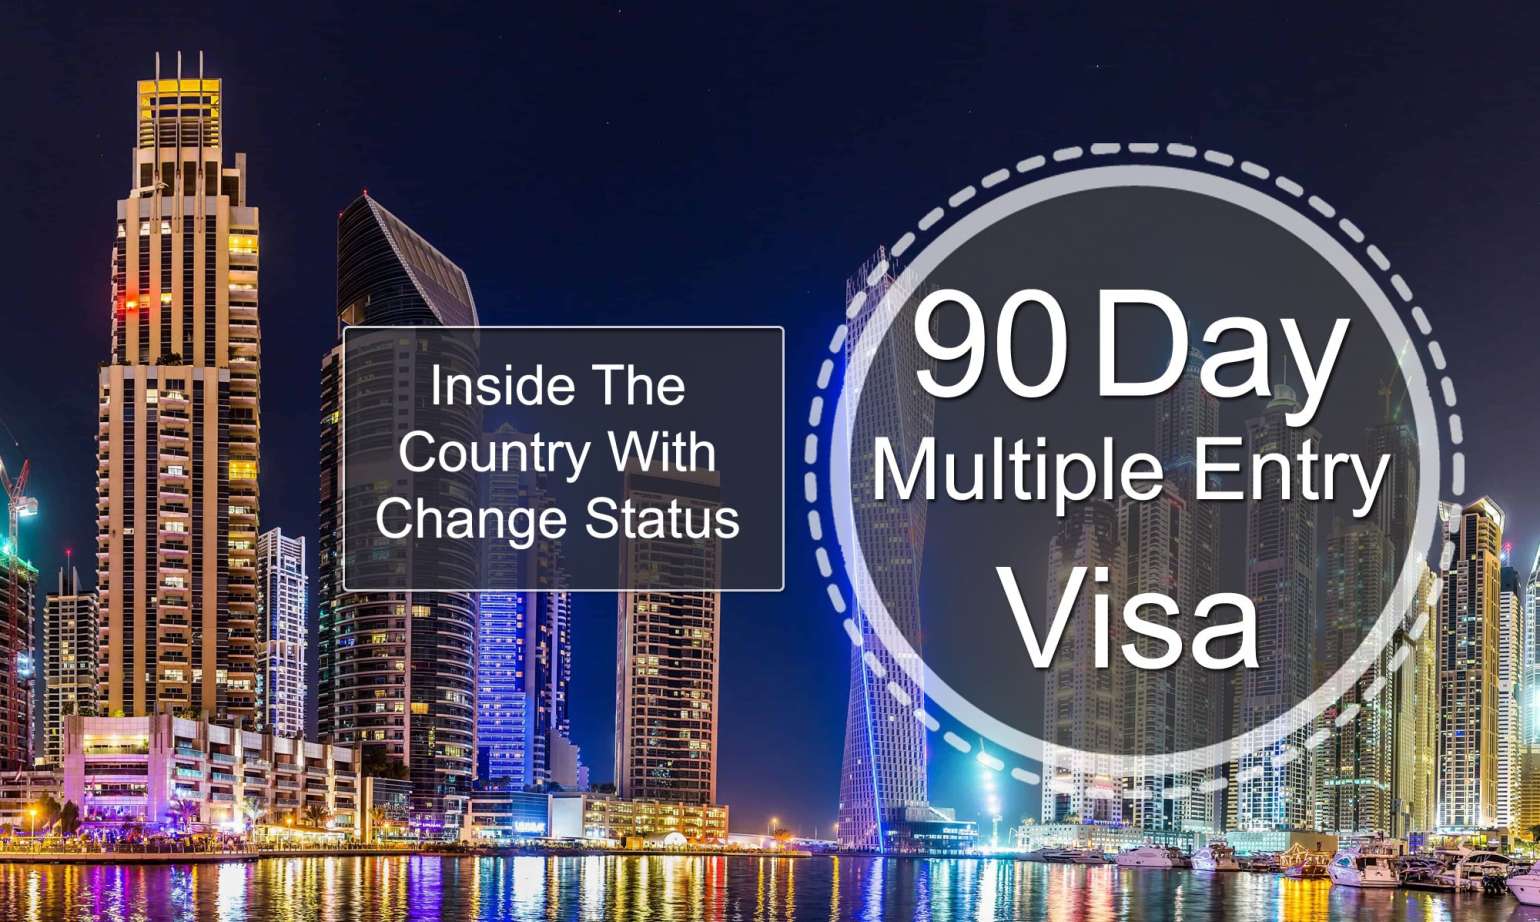 Inside the country with Change Status 90 Days Multiple Entry Visa